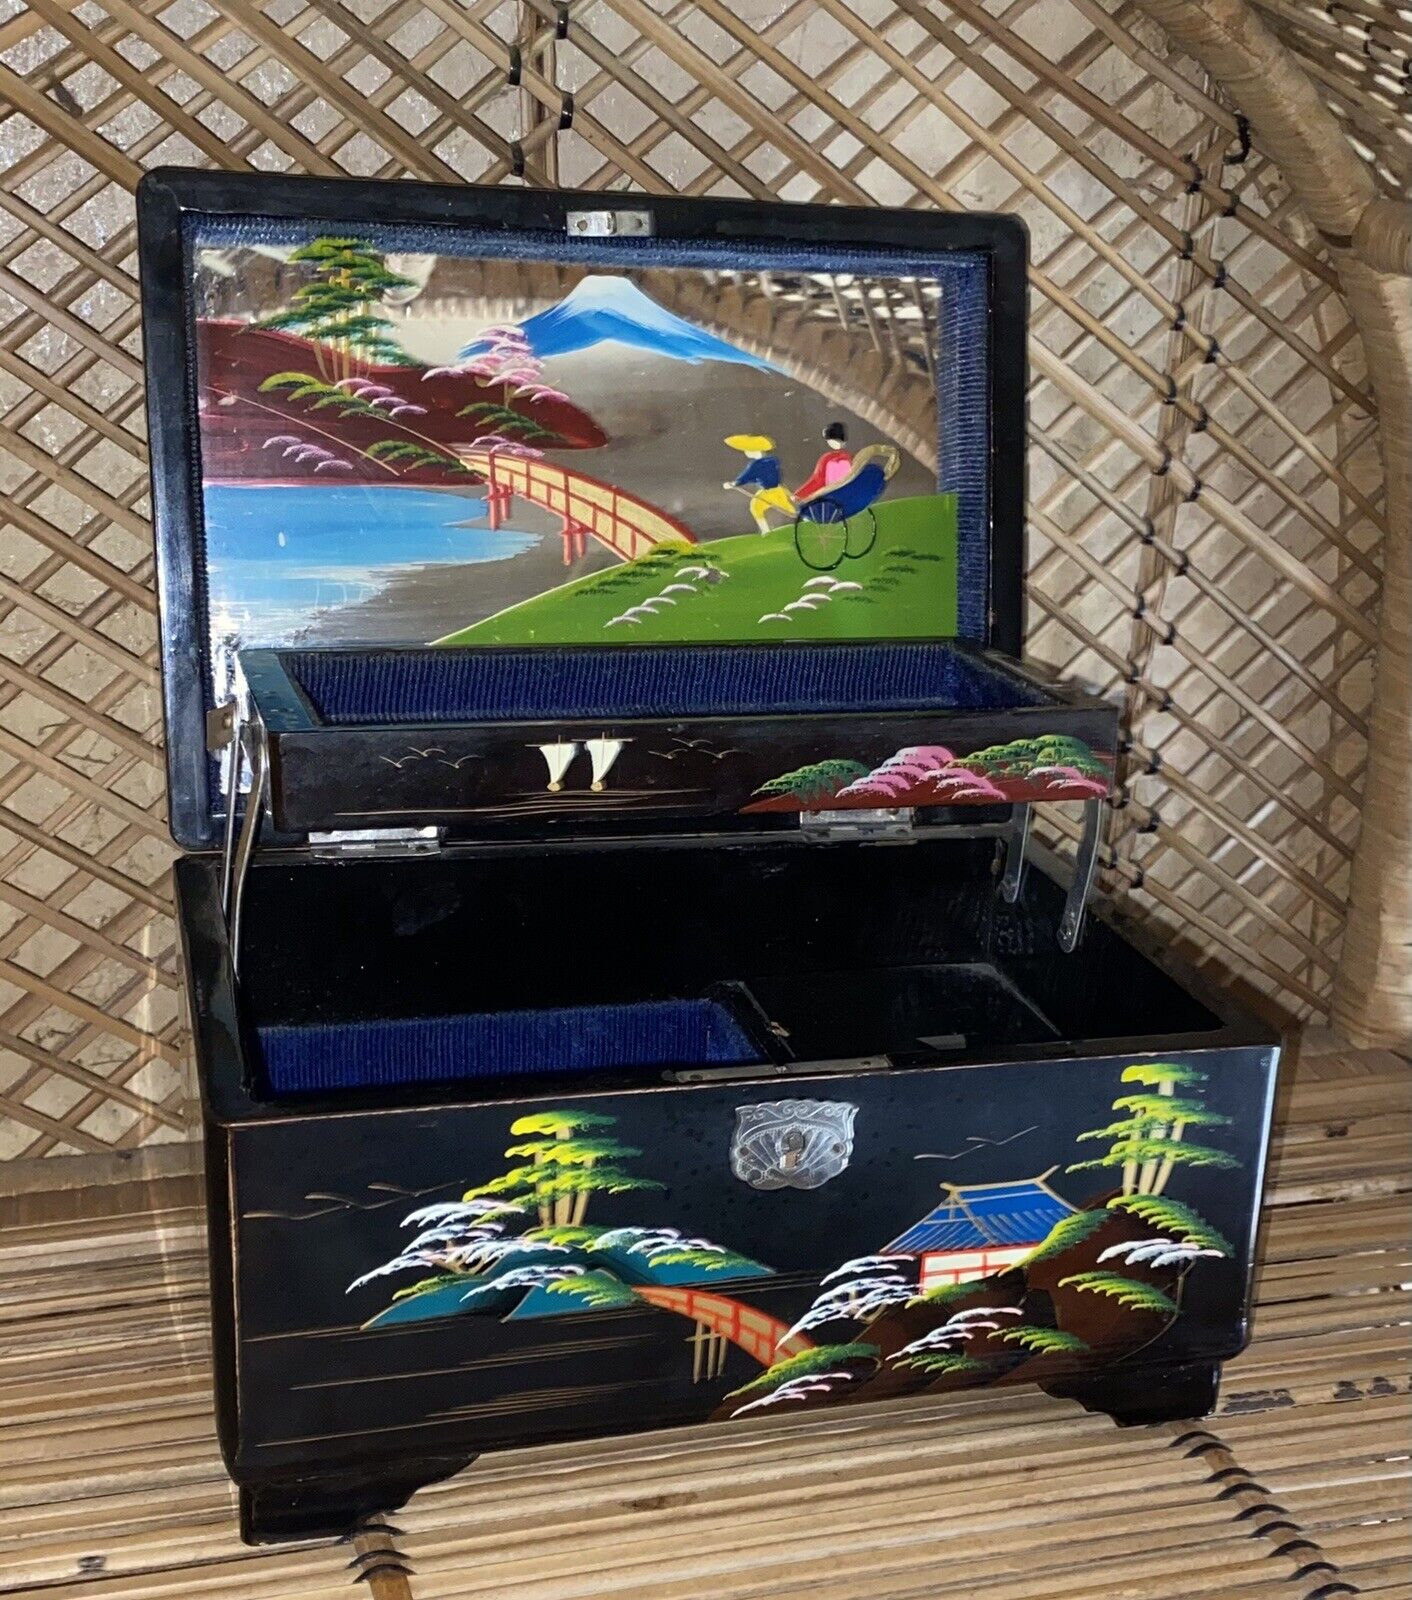 Vintage FUJI Made in Japan Lacquered Music Jewelry Box, Abalone Inlay, Mt. Fuji